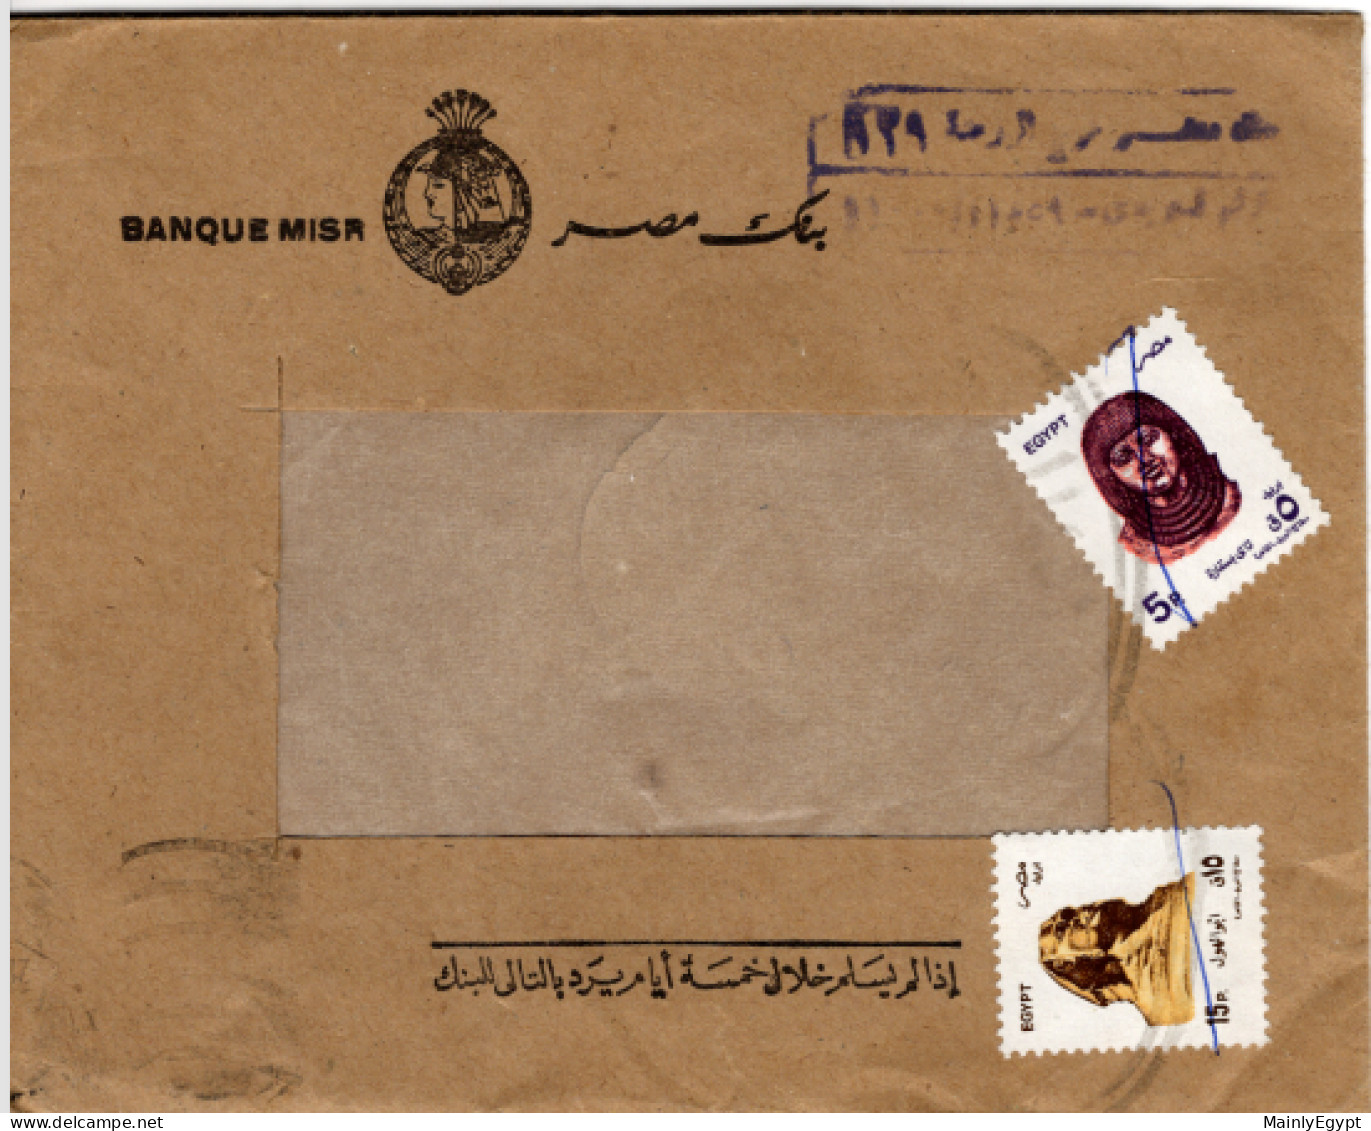 EGYPT: 1994 (?) Cover - Bank Mail, Banque Misr, Mi.1817,1818 Statue And Sphinx (B172) - Storia Postale